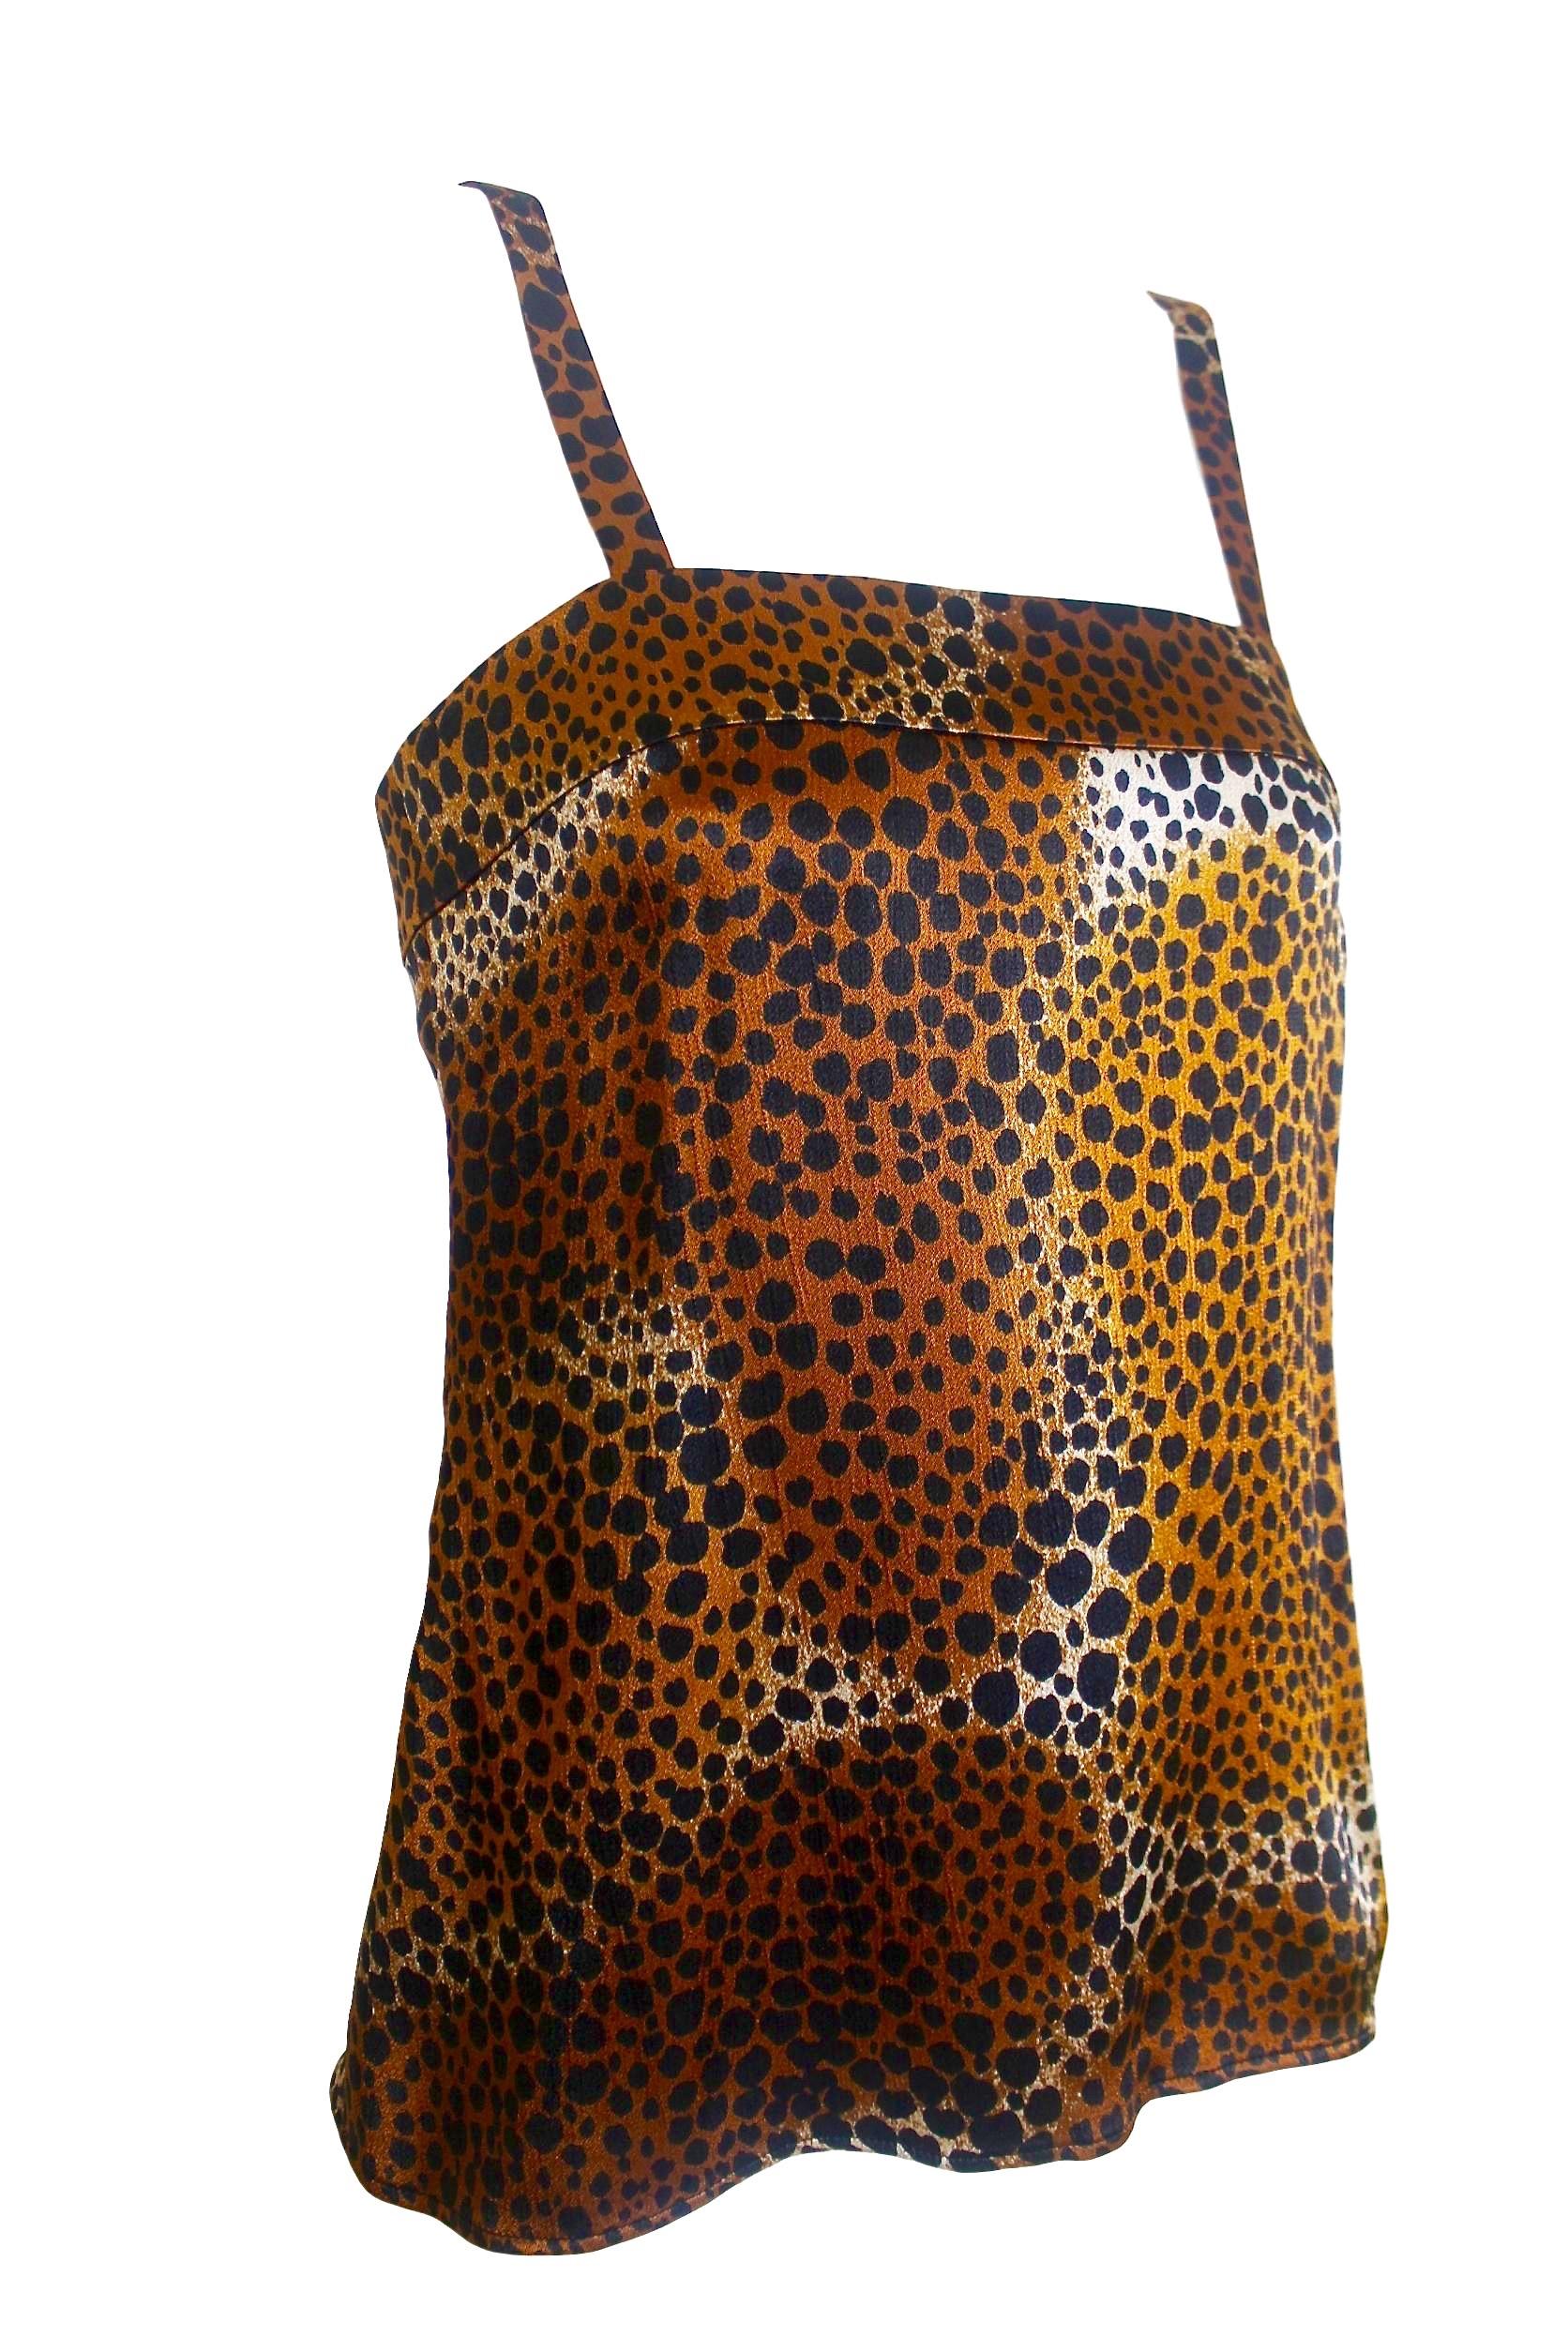 Yves Saint Laurent 1977 Leopard Print Camisole and Trousers For Sale 6